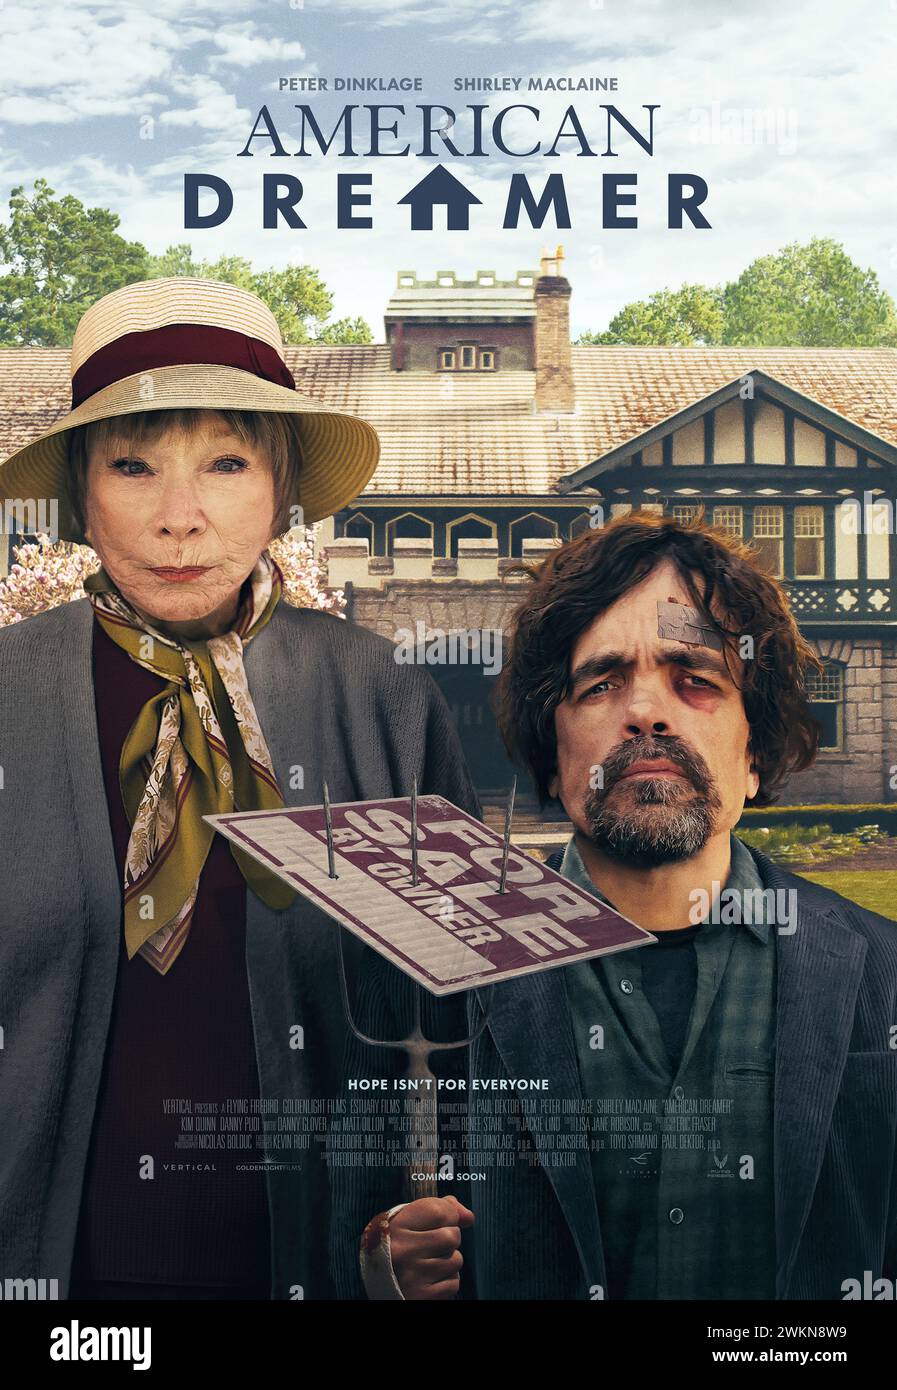 American Dreamer (2022) directed by Paul Dektor and starring Peter Dinklage, Shirley MacLaine and Matt Dillon. Phil's a dreamer. Most dreams don't come true. Phil hates that. But that's not going to stop Phil from dreaming. US one sheet poster ***EDITORIAL USE ONLY***. Credit: BFA / Vertical Entertainment Stock Photo